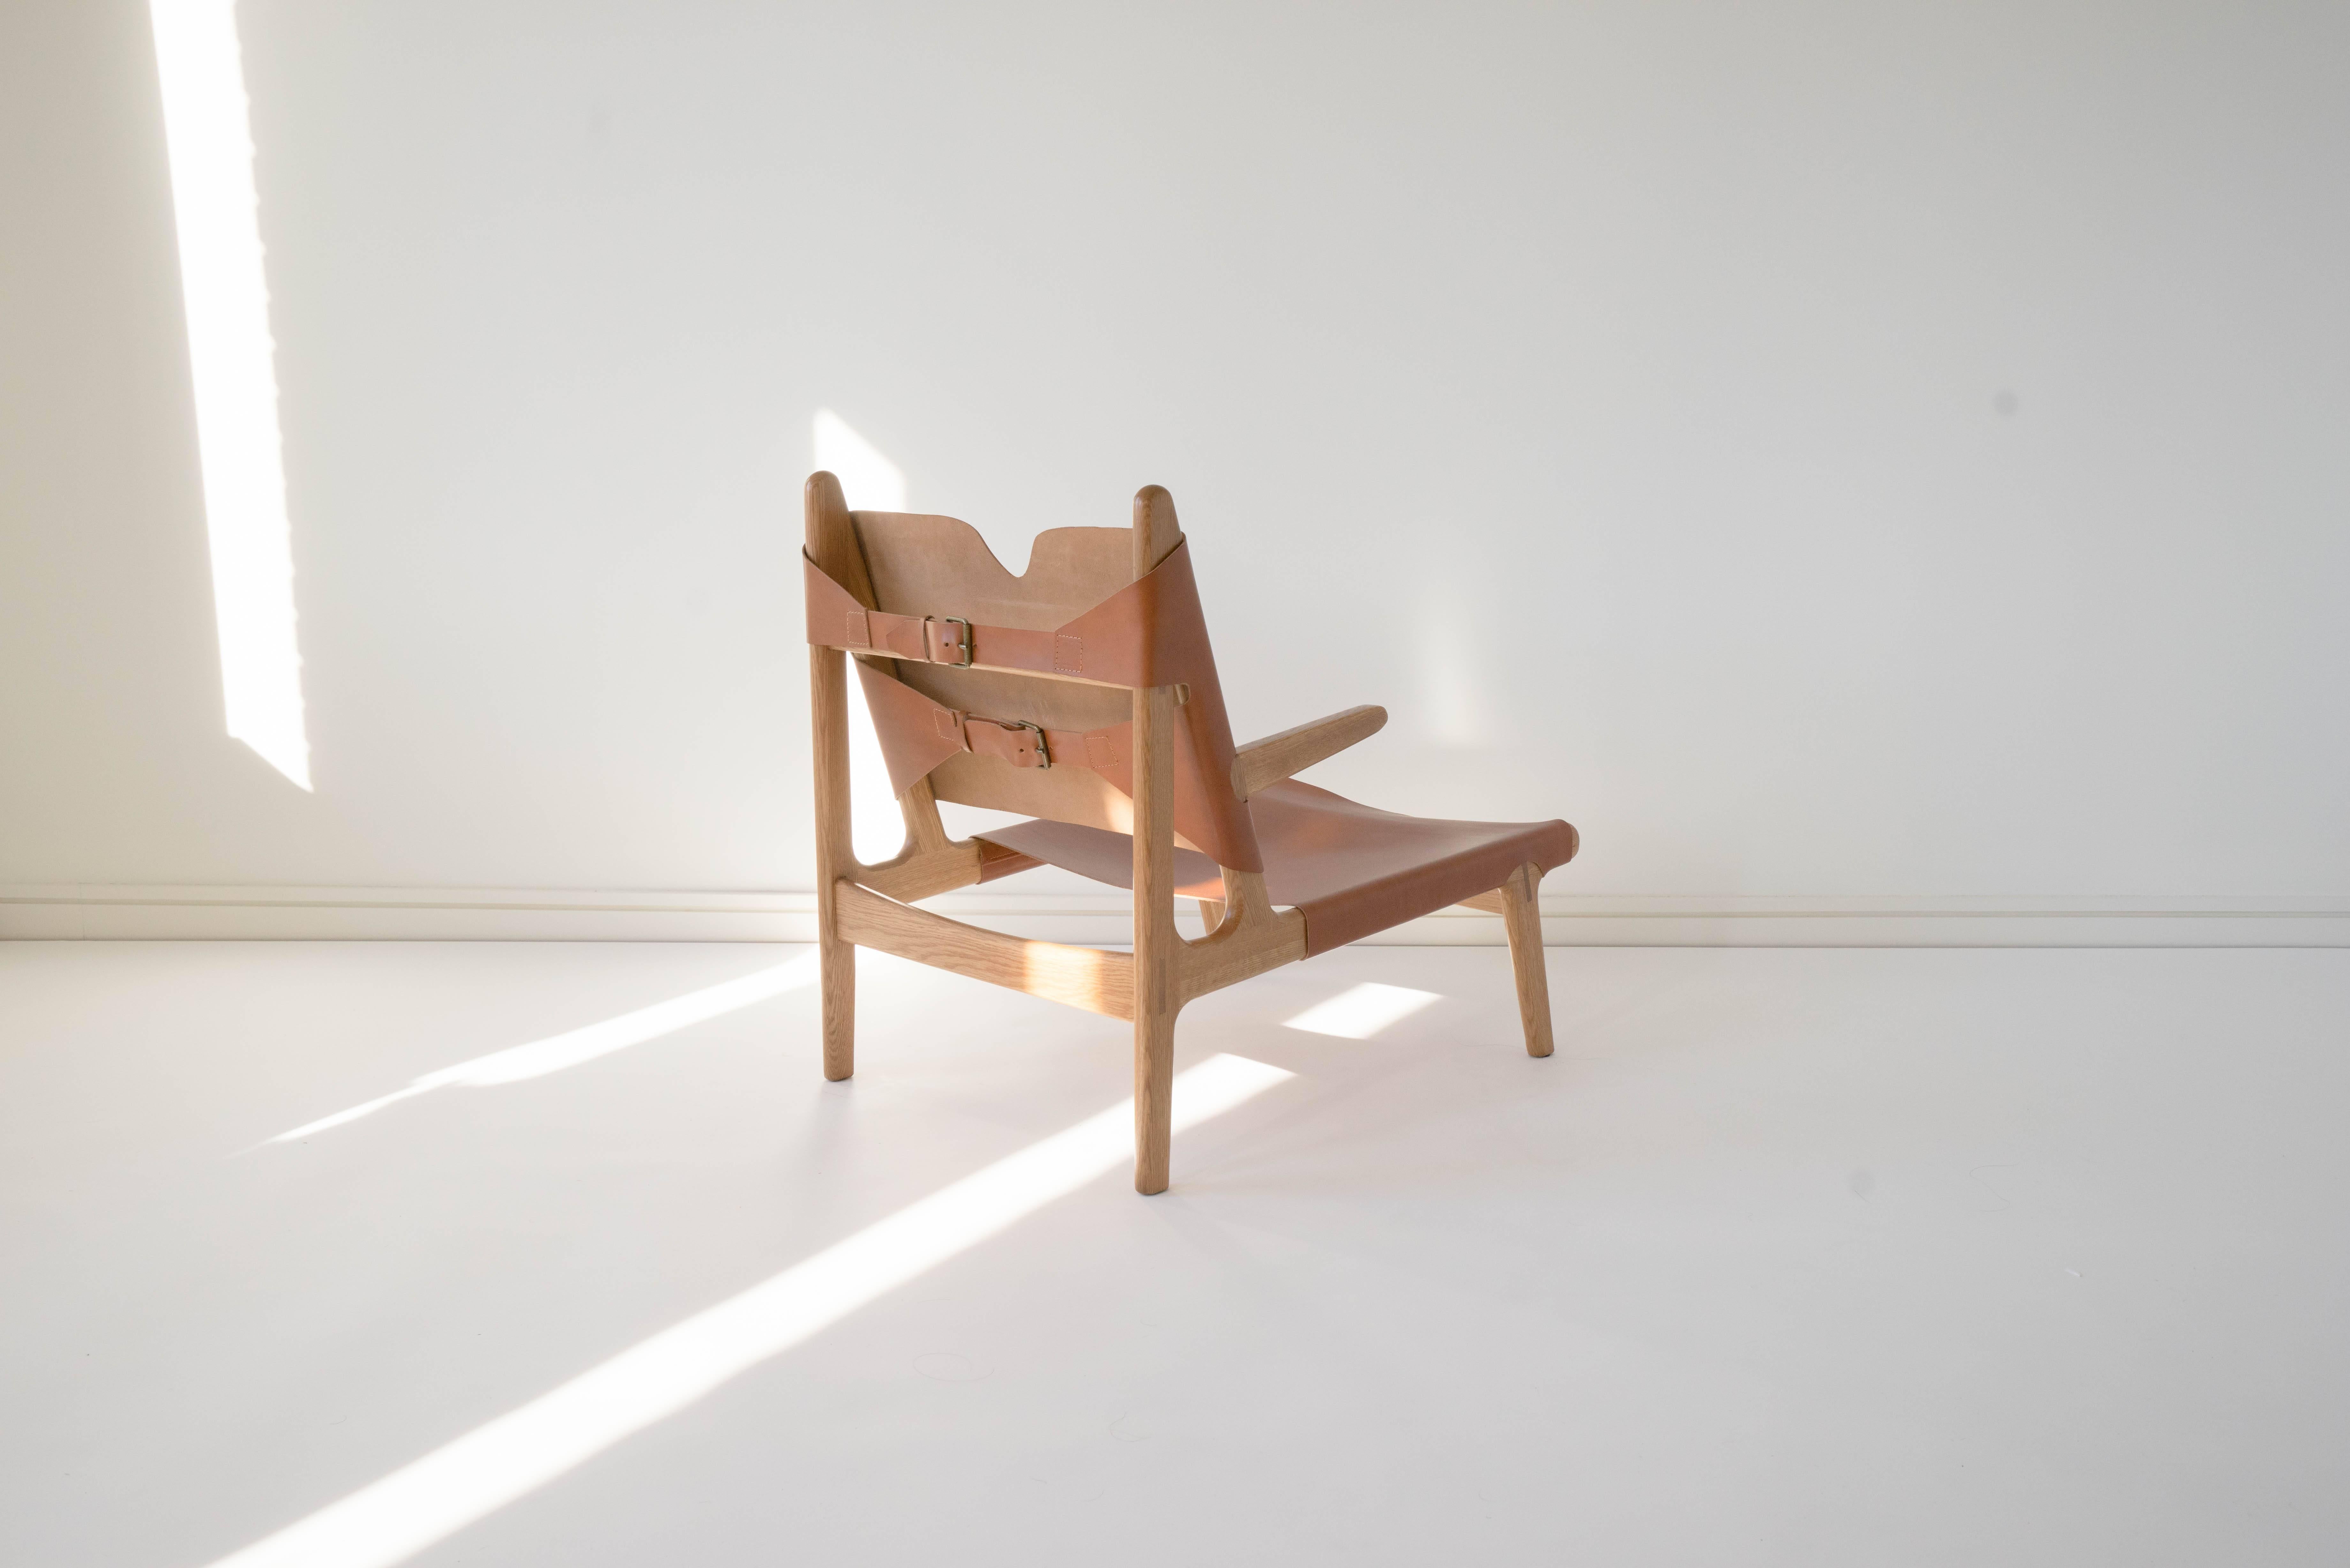 Sun at six is a contemporary furniture design studio that works with traditional Chinese joinery masters to handcraft our pieces using traditional joinery. Vegetable tanned leather will patina with age. Exposed joinery throughout. Also available in